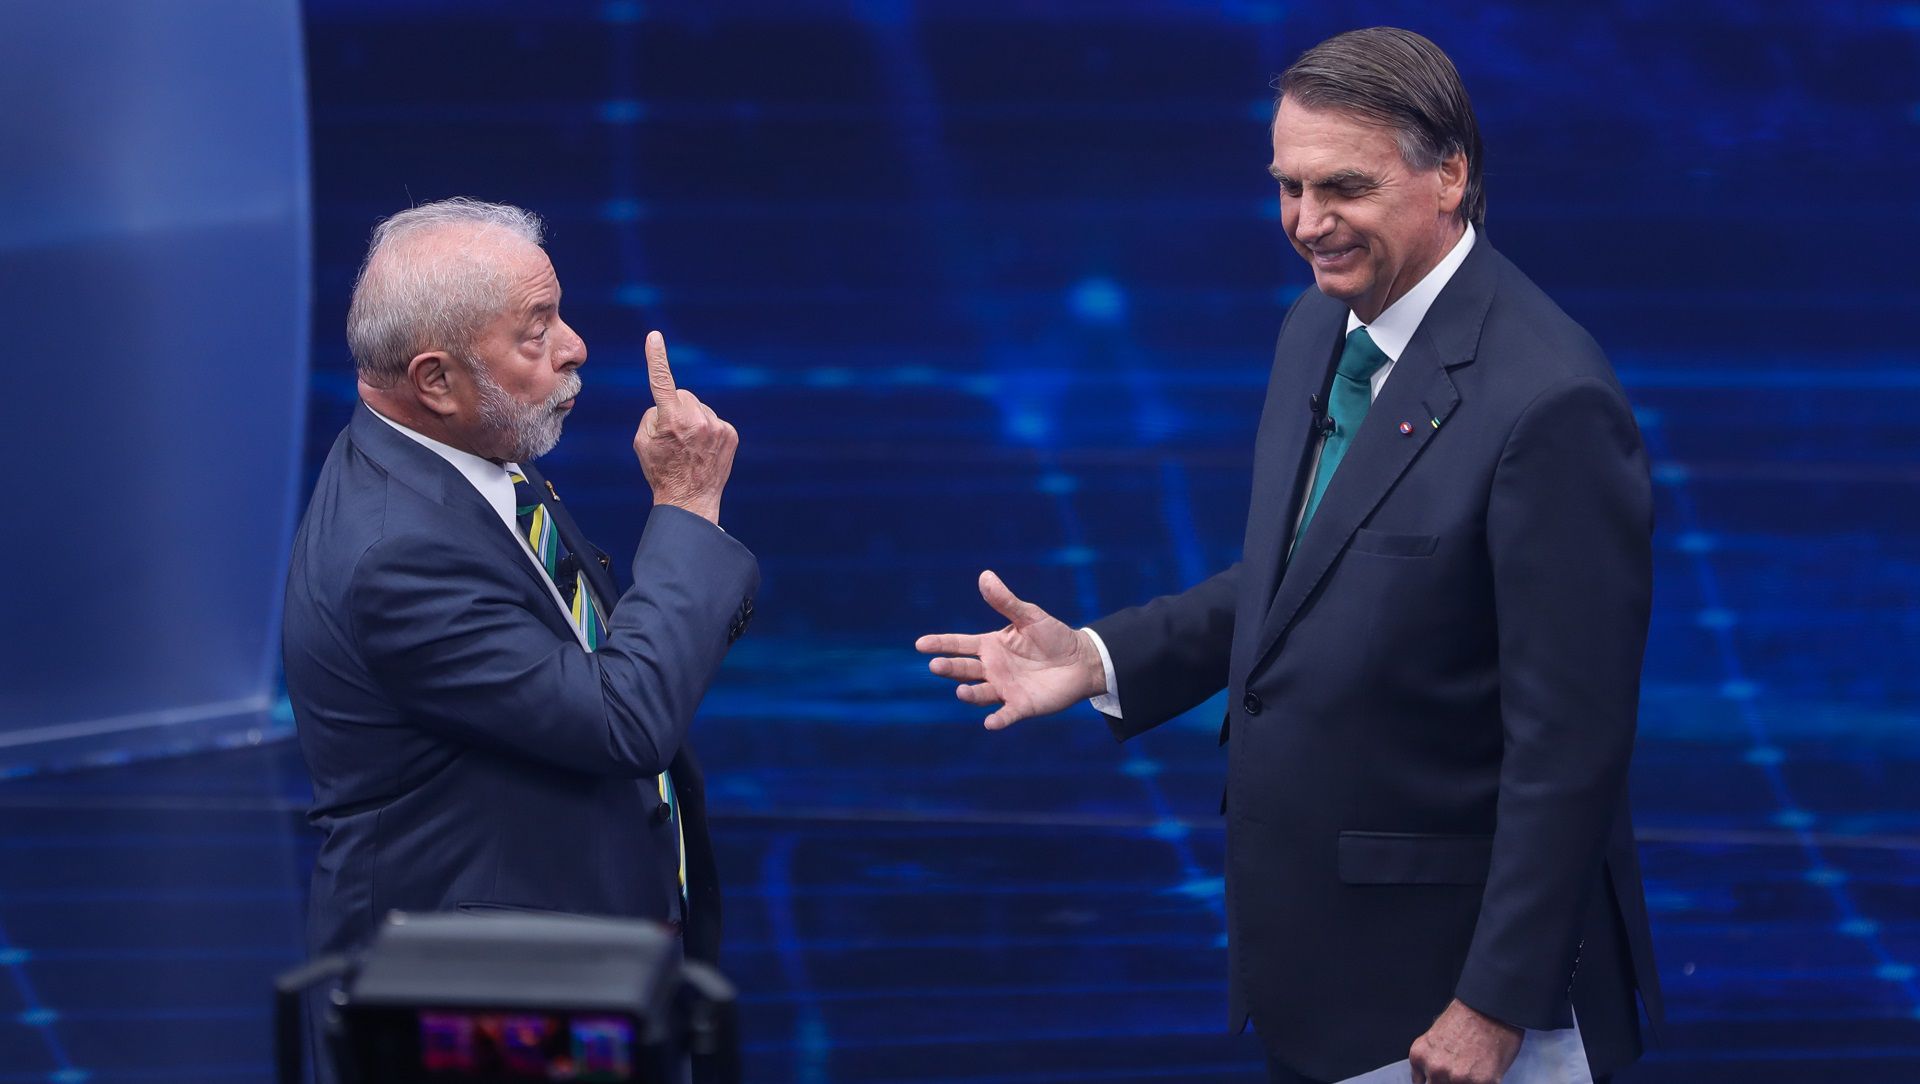 FILE - Brazil's former President Luiz Inacio Lula da Silva, left, and incumbent Jair Bolsonaro, take part in a presidential debate in Sao Paulo, Brazil, Oct. 16, 2022. During the first segment of their first one-on-one debate, they sought to convince poor voters that welfare payments will remain at their value. (AP Photo/Marcelo Chello, File)